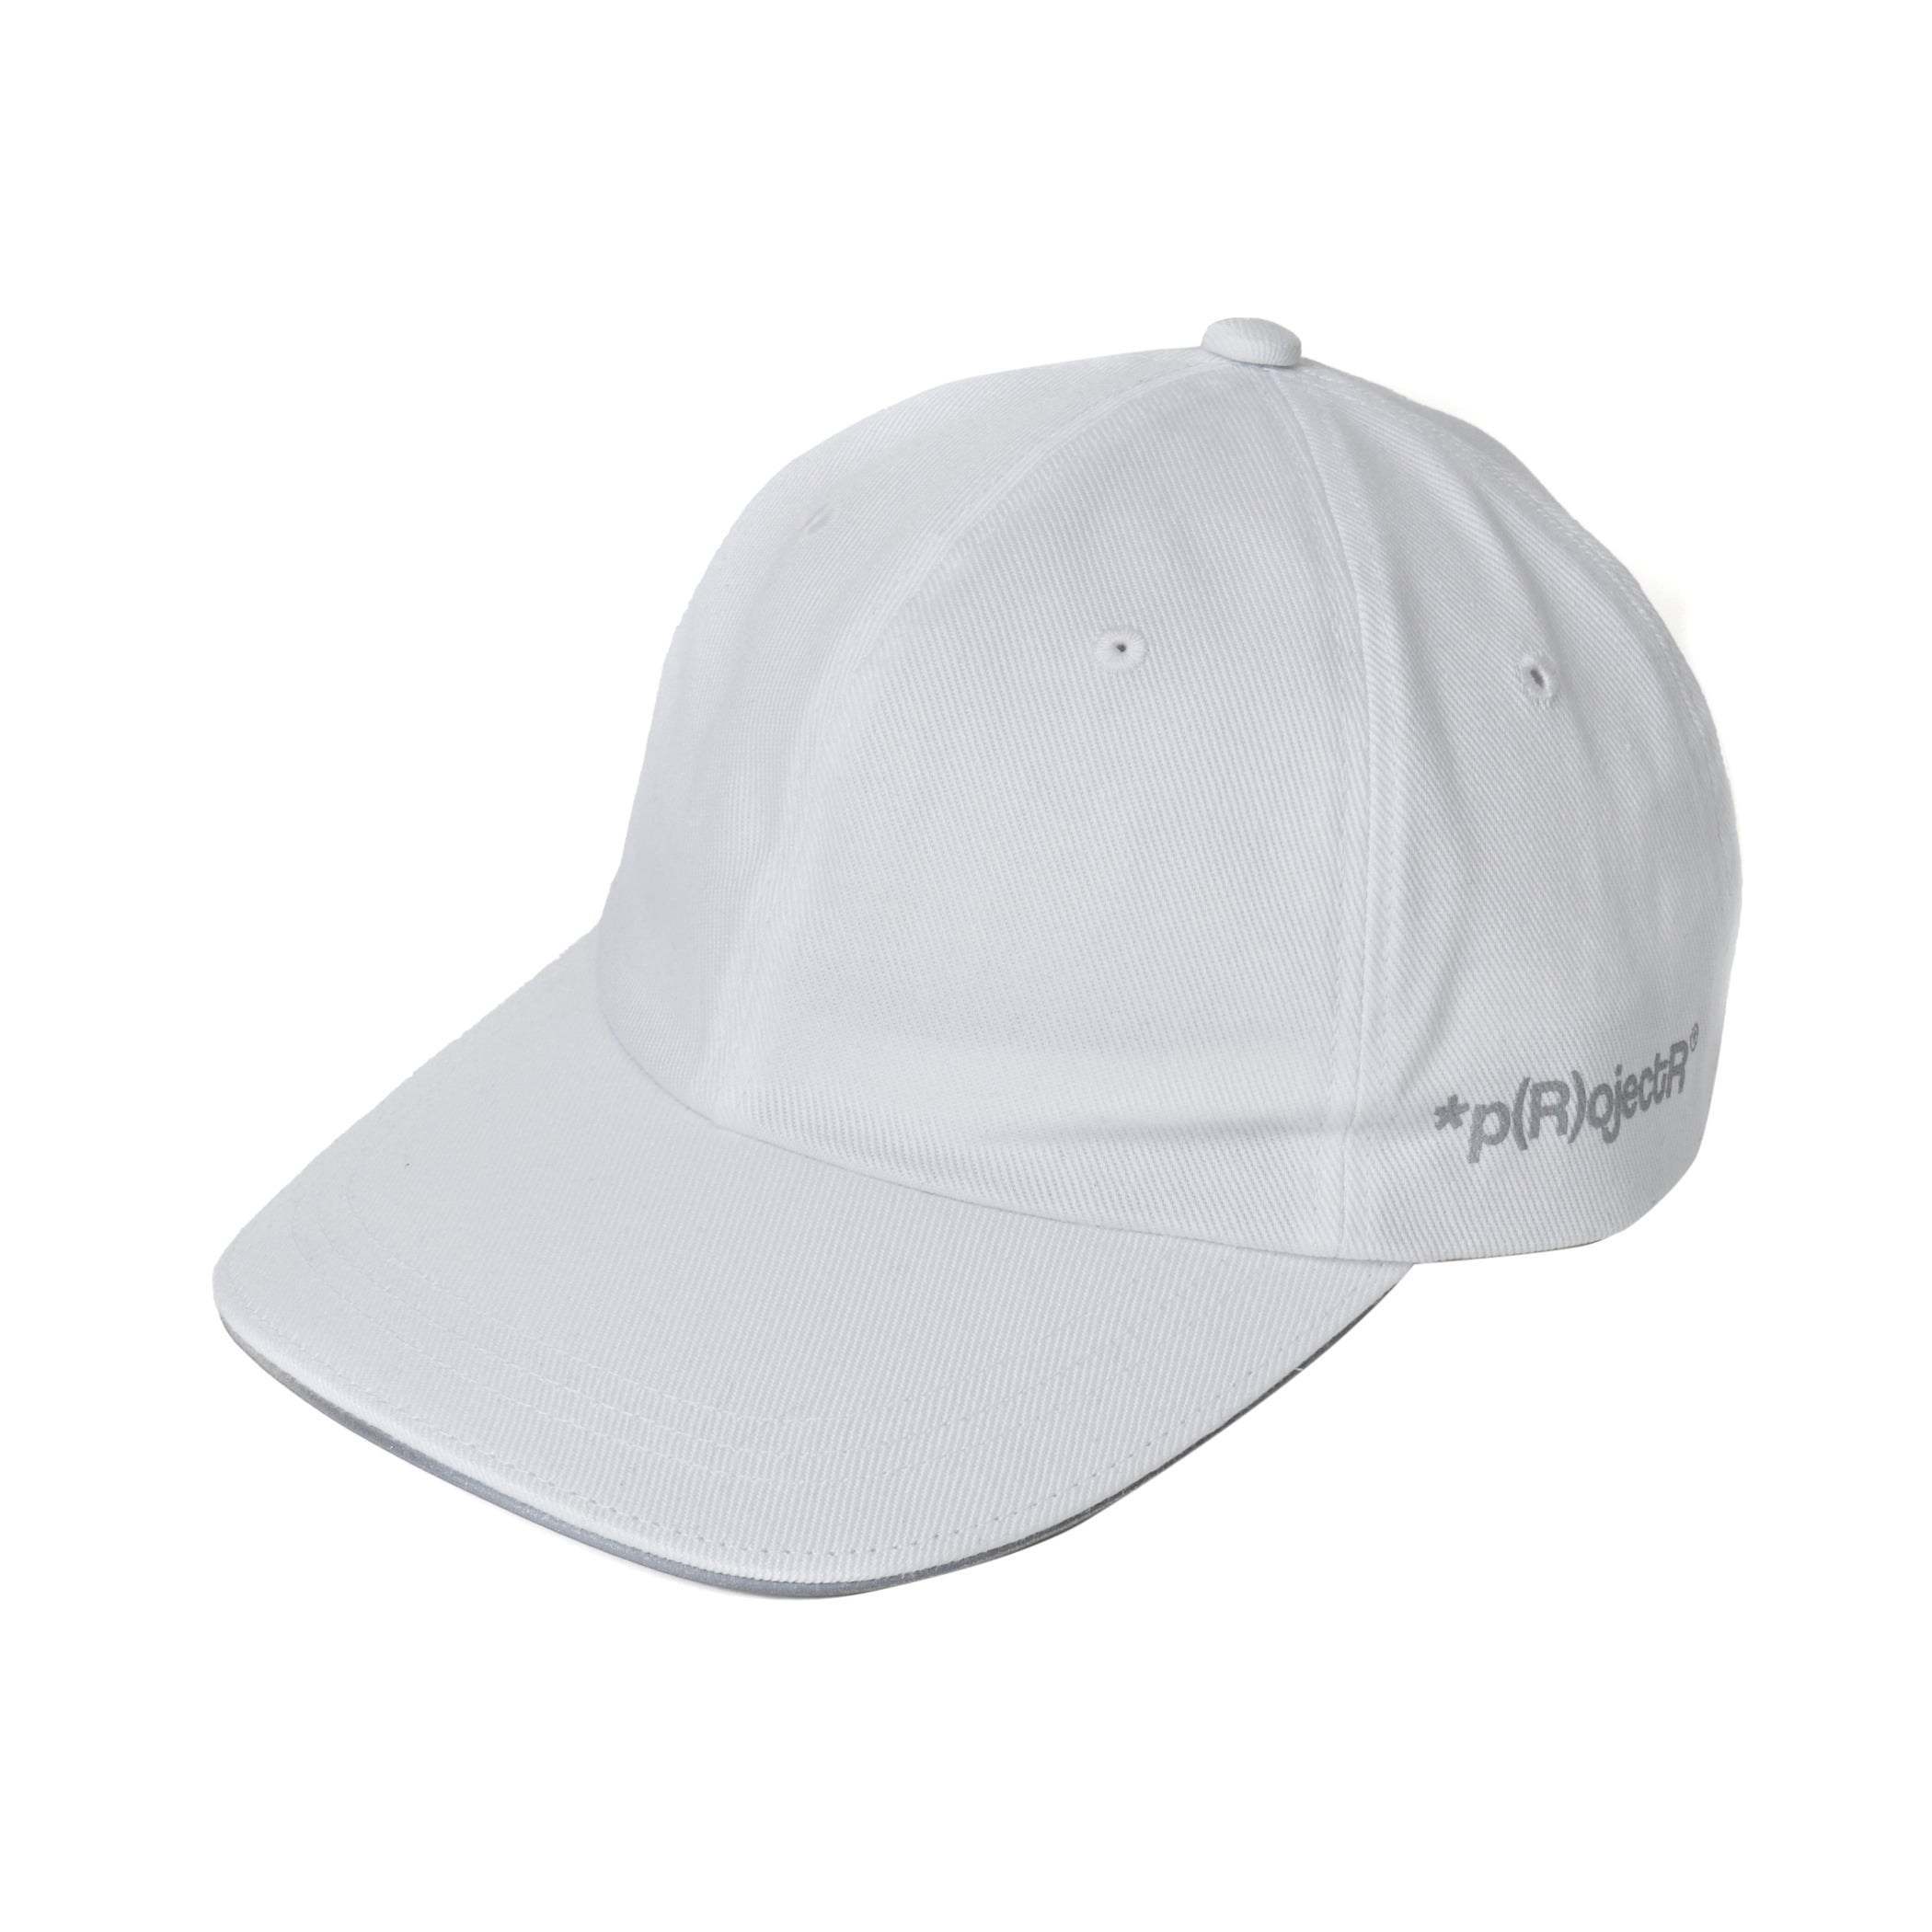 Reflective Piping Cap | *p(R)ojectR® | VERTICAL GARAGE OFFICIAL 